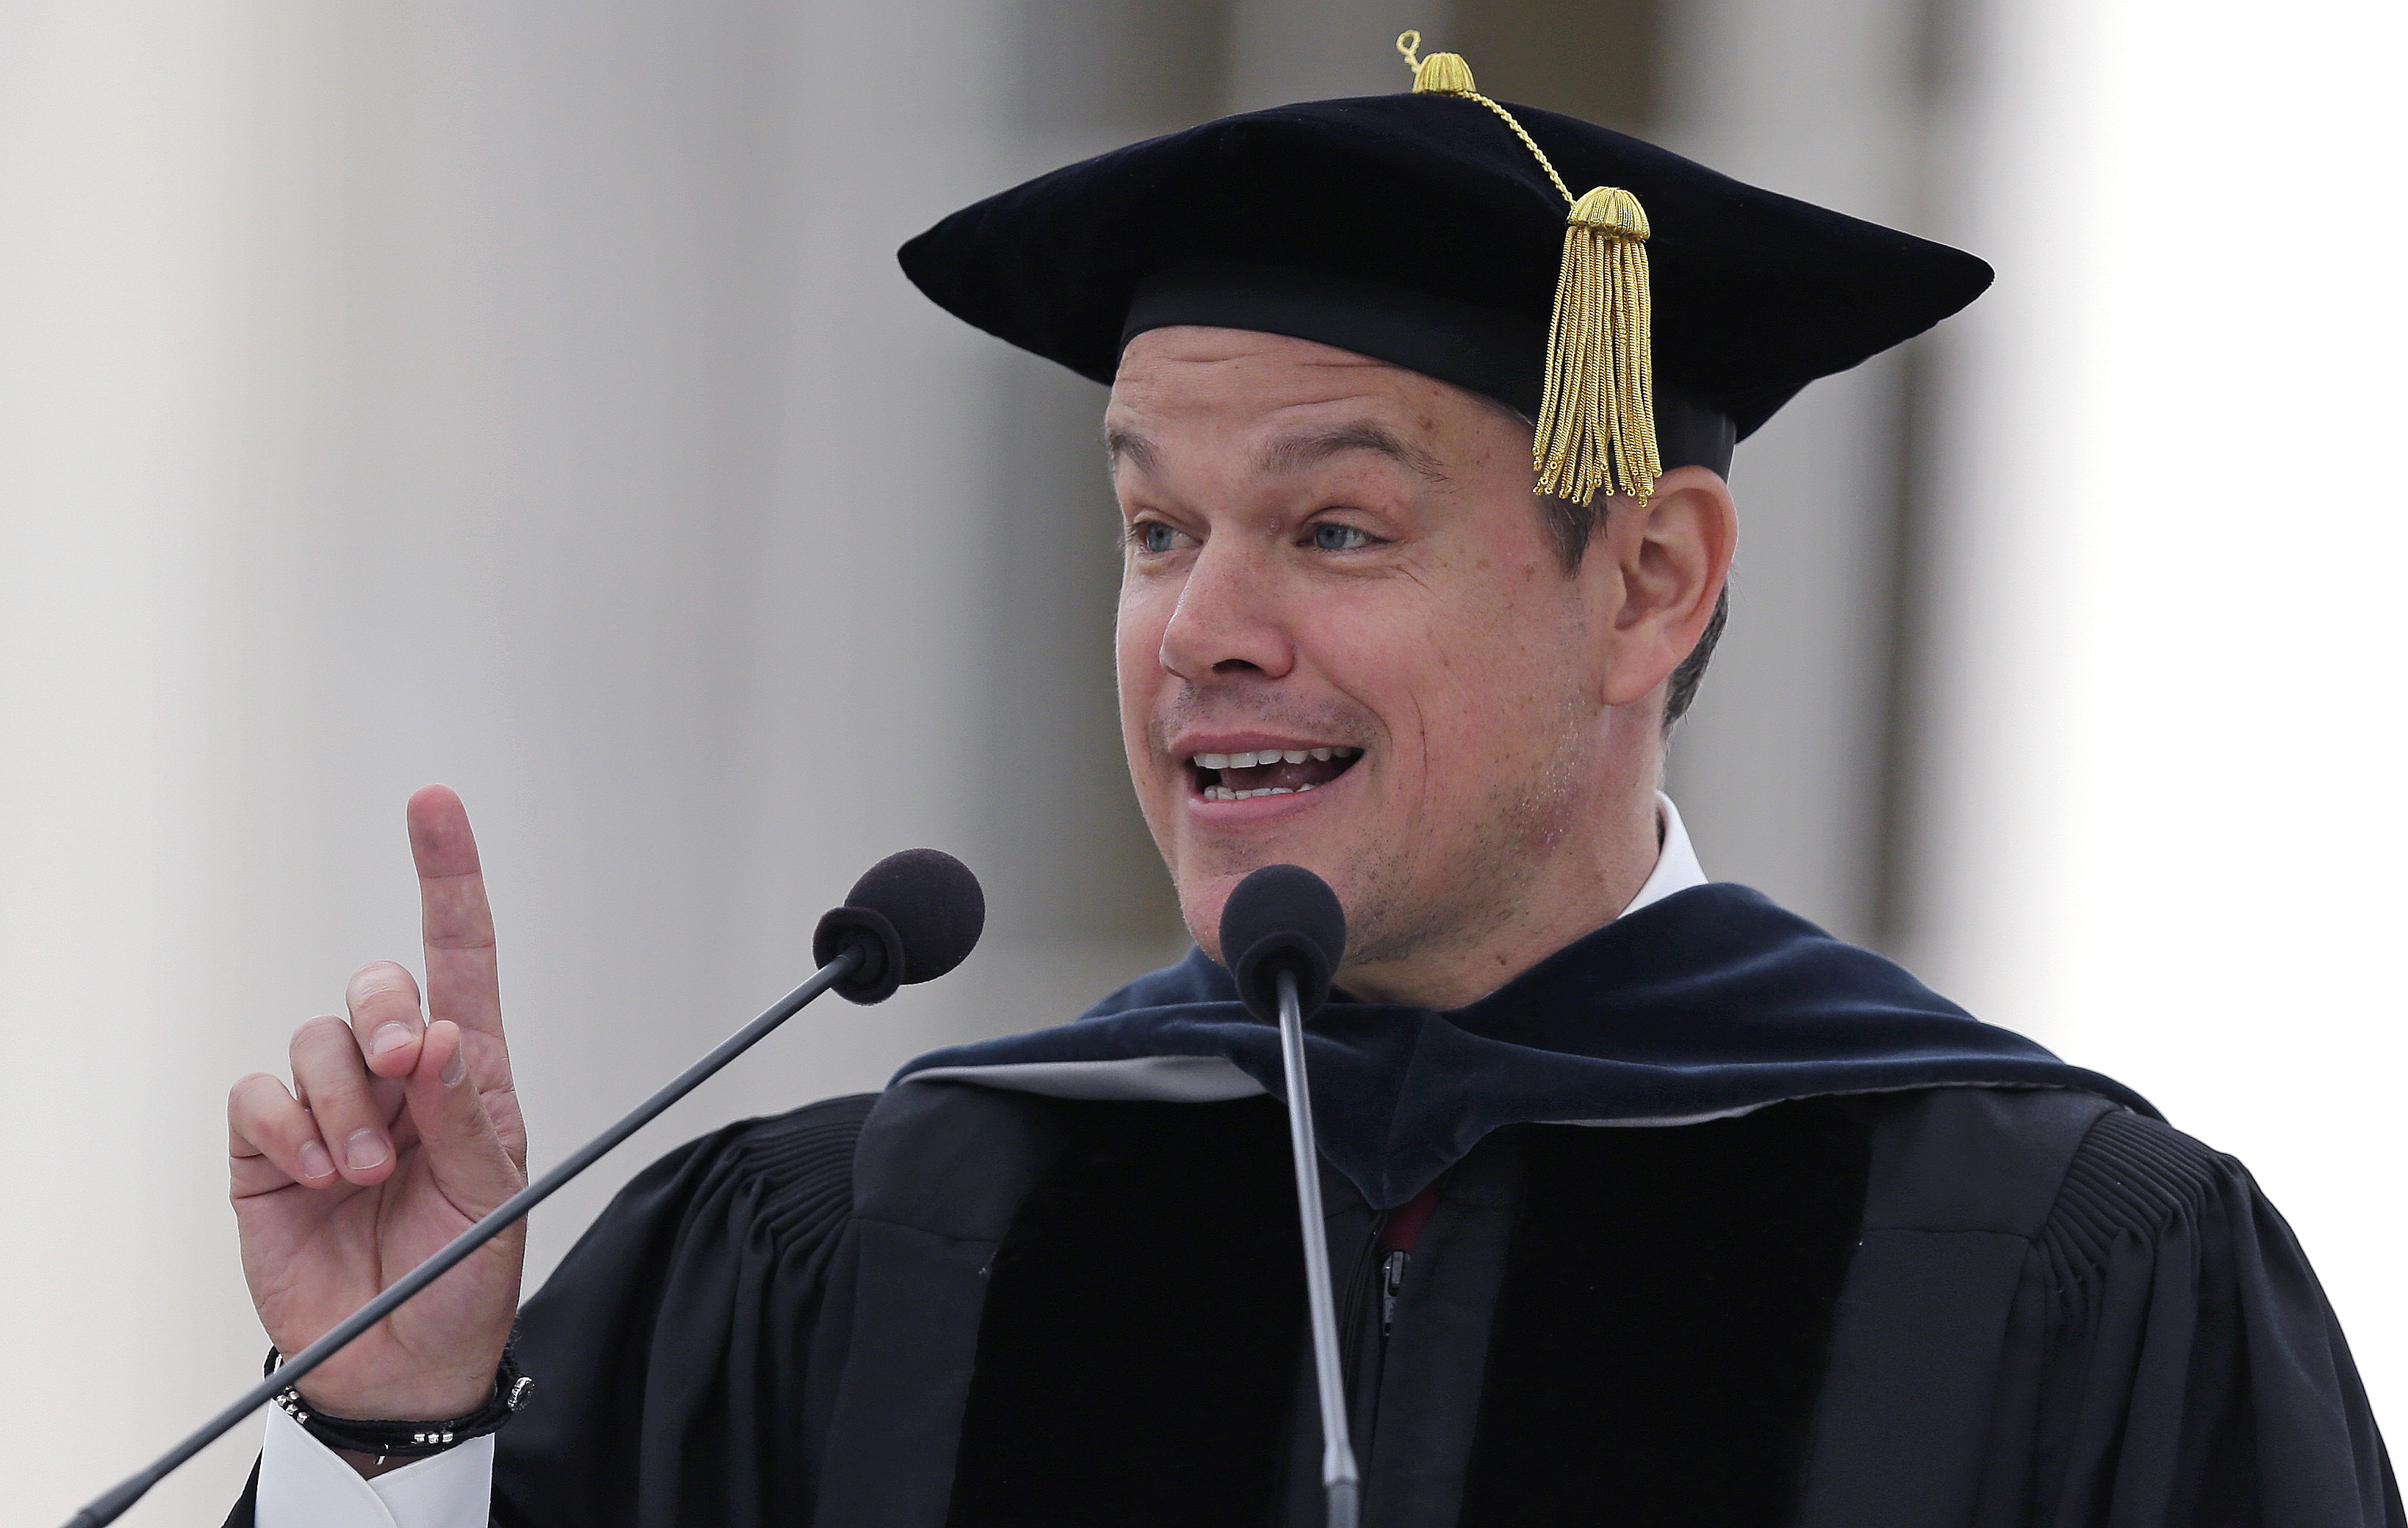 Actor Matt Damon gestures during his address at the Massachusetts Institute of Technology's commencement in Cambridge, Mass., Friday, June 3, 2016. Damon won an Academy Award for co-writing the 1997 film "Good Will Hunting", where he portrayed a mathematically gifted MIT janitor. (AP Photo/Charles Krupa)